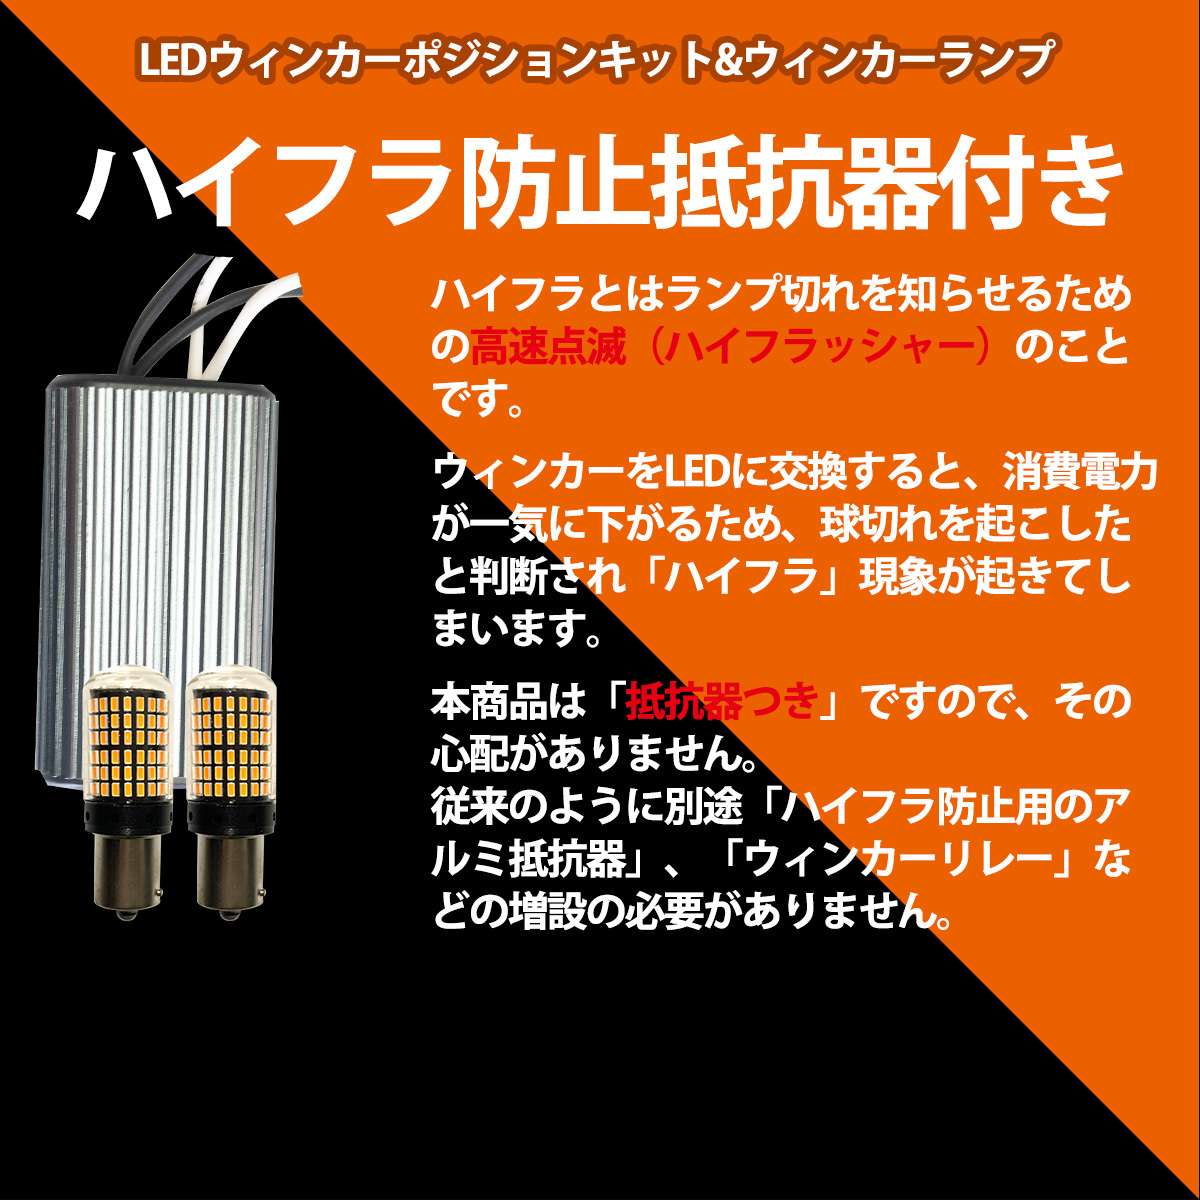 1】 S25 LED ウィンカー ポジション キット S25 144LED ウィンカー バルブセット